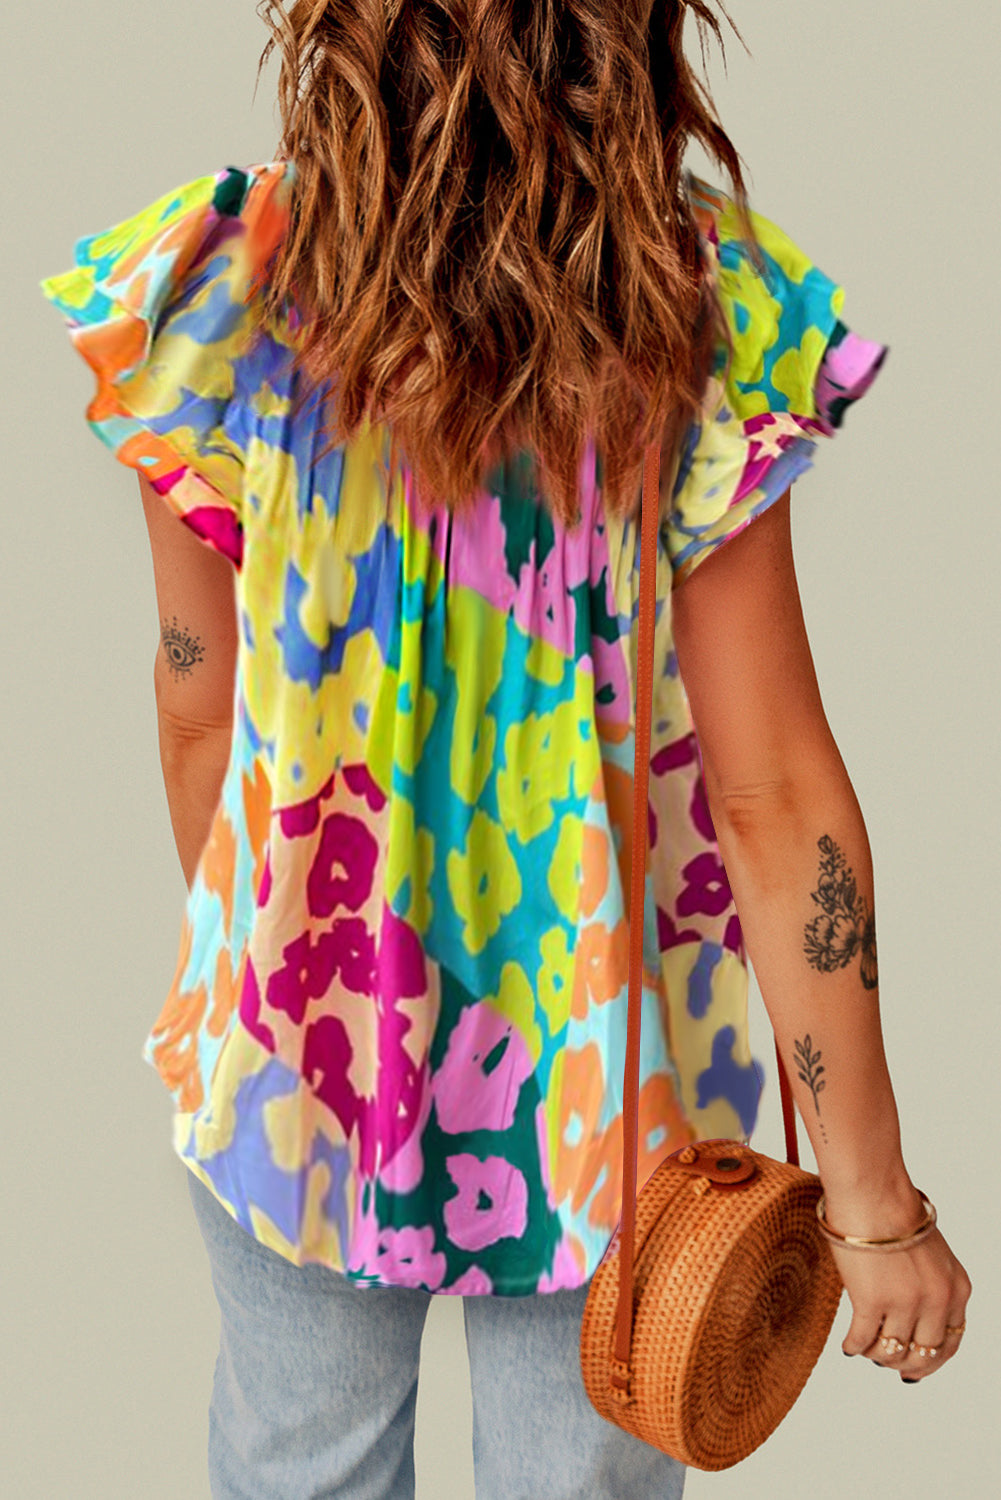 Ruffled Printed Tie Neck Blouse (Multiple Colors)